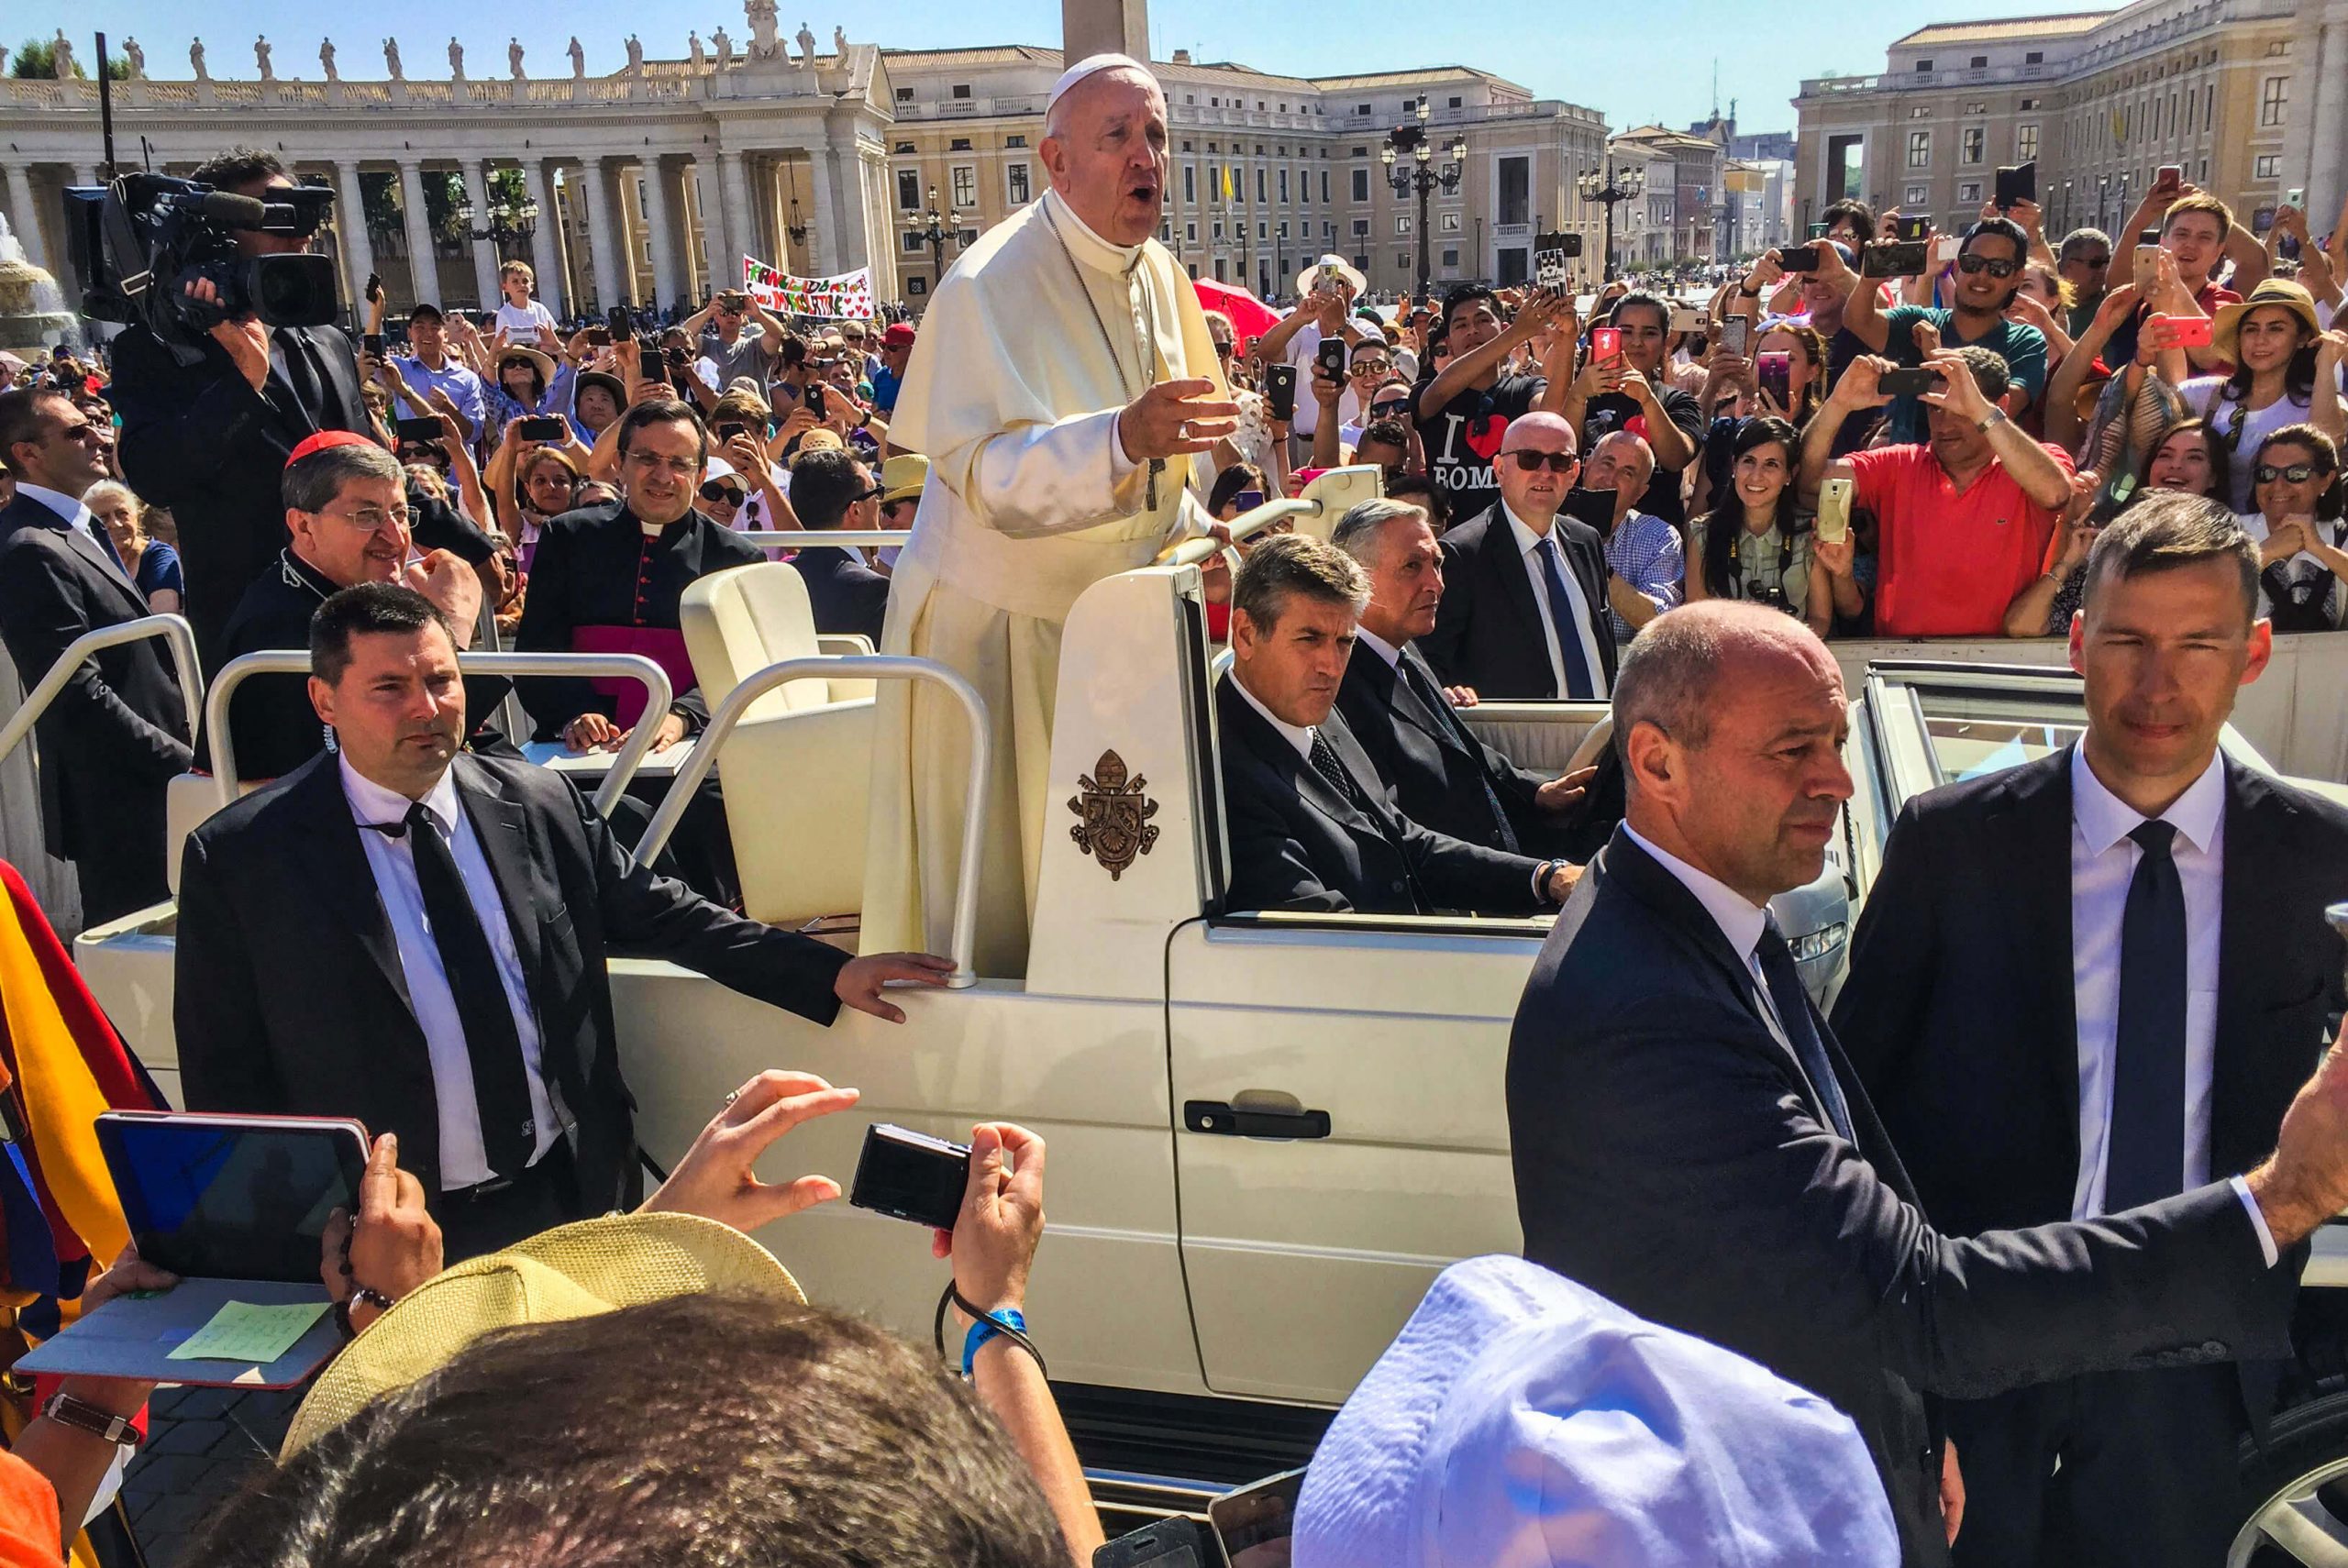 PAPA FRANCESCO! The people were screaming the name of the rockstar Pope when I was there in June 2018. Pope Francis caused quite a global stir when he was reported to have called for same-sex civil unions.